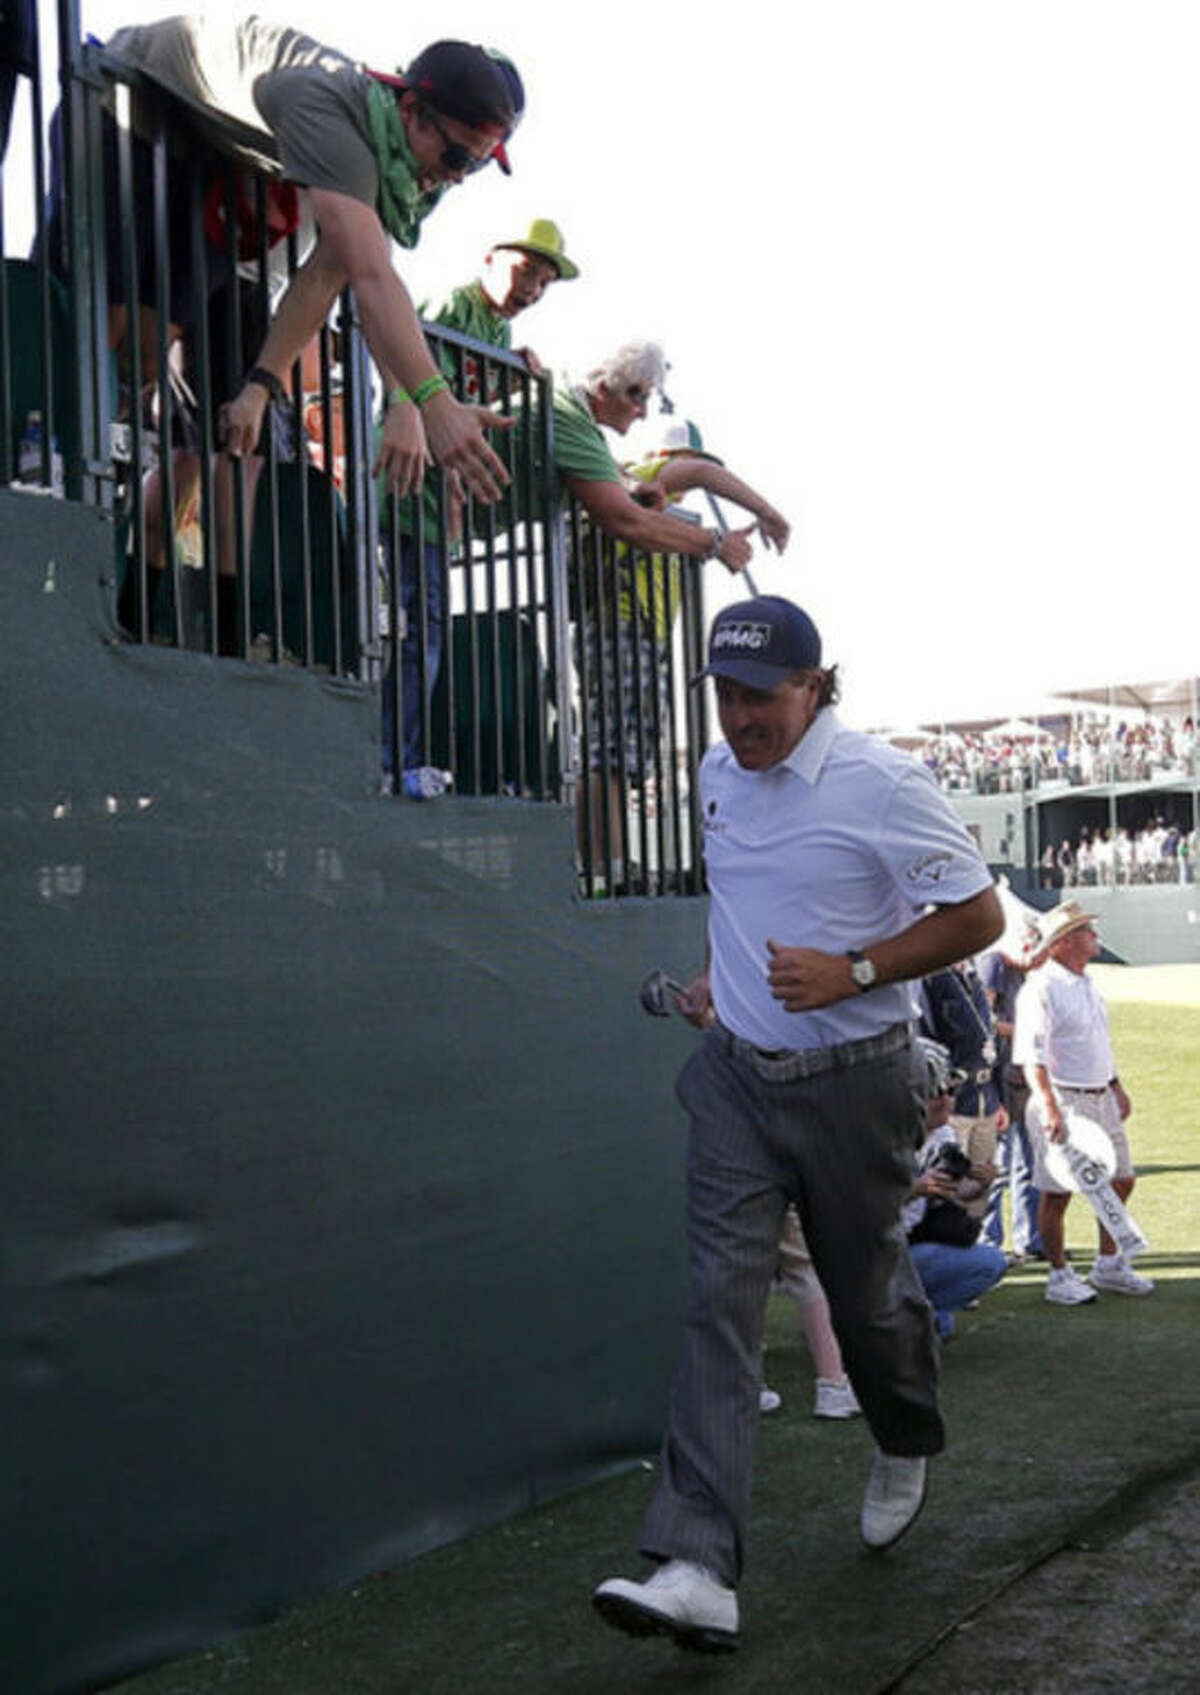 Phil Mickelson runs to the 17th tee from the 16th green during the third round of the Waste Management Phoenix Open golf tournament on Saturday, Feb. 2, 2013, in Scottsdale, Ariz. (AP Photo/Matt York)